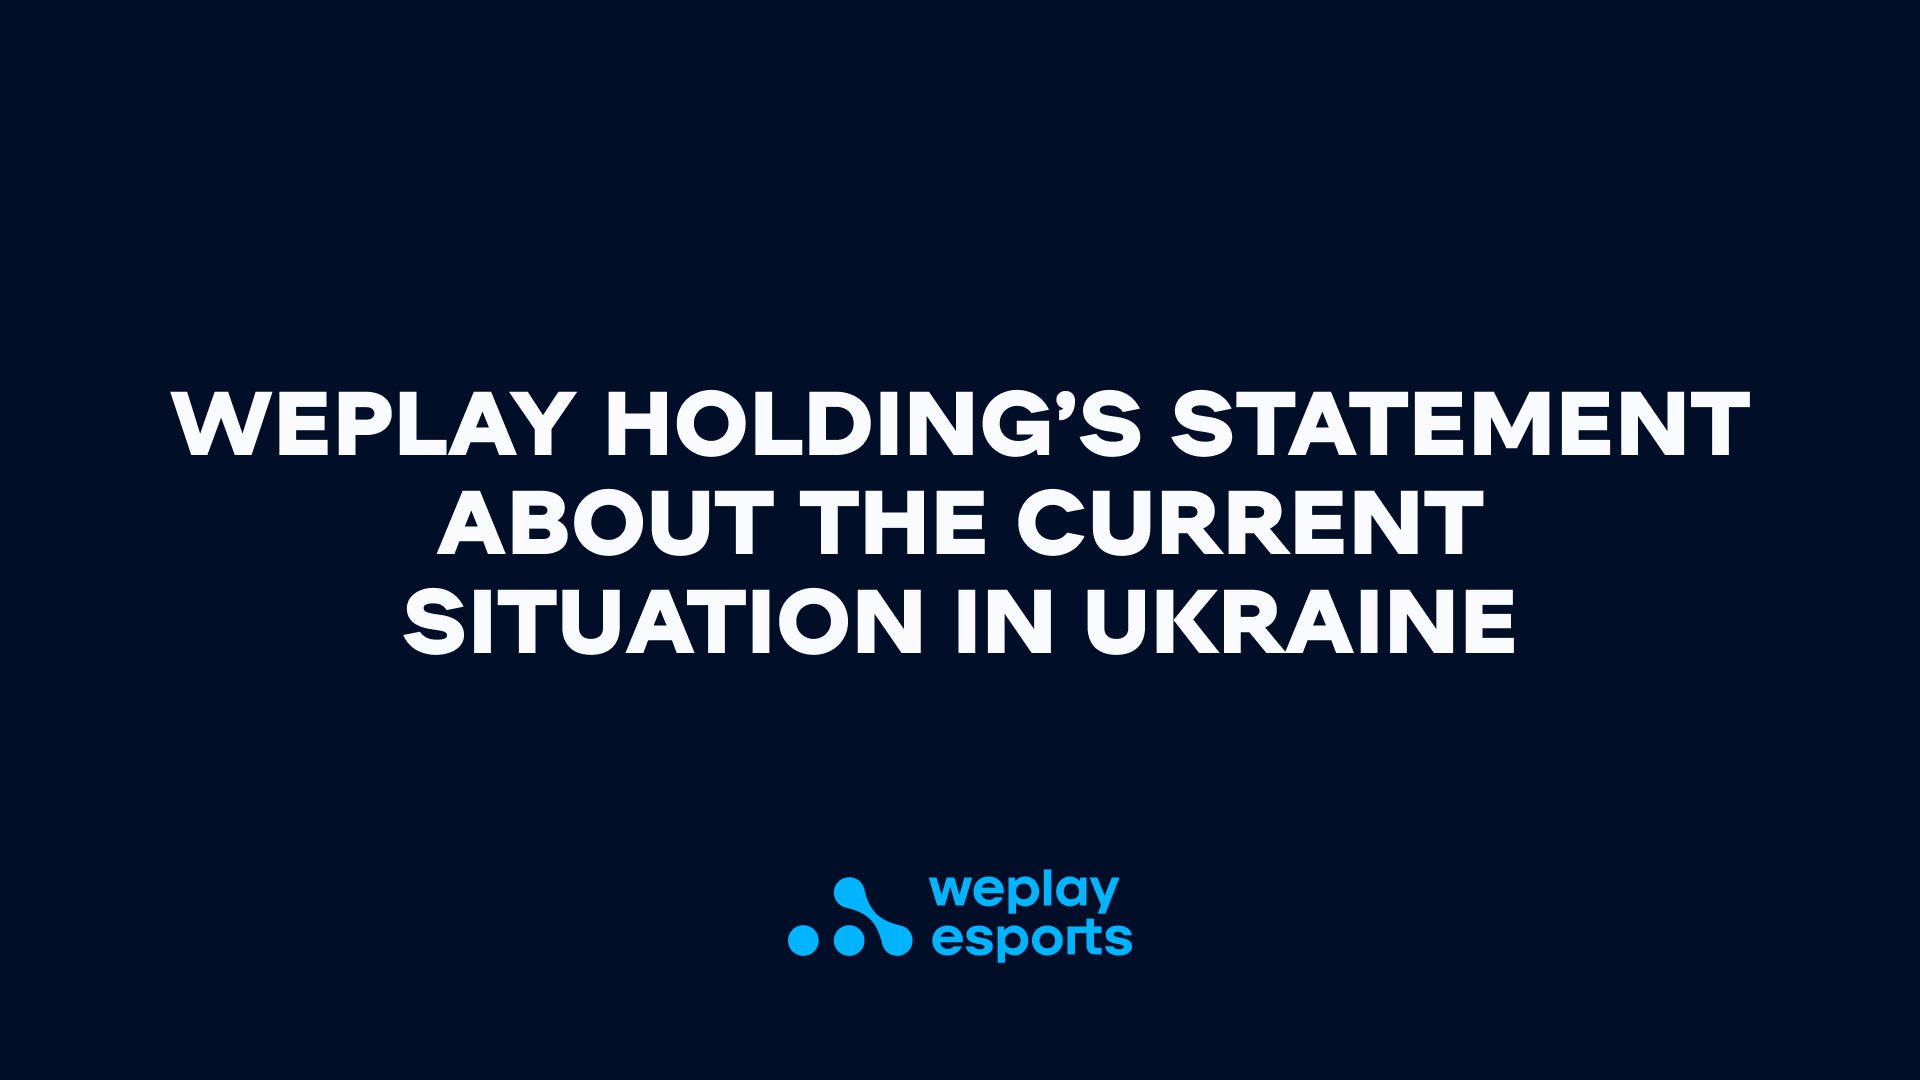 The Ukrainian office of WePlay Holding keeps working remotely, fulfilling all the obligations to stakeholders. Image: WePlay Holding